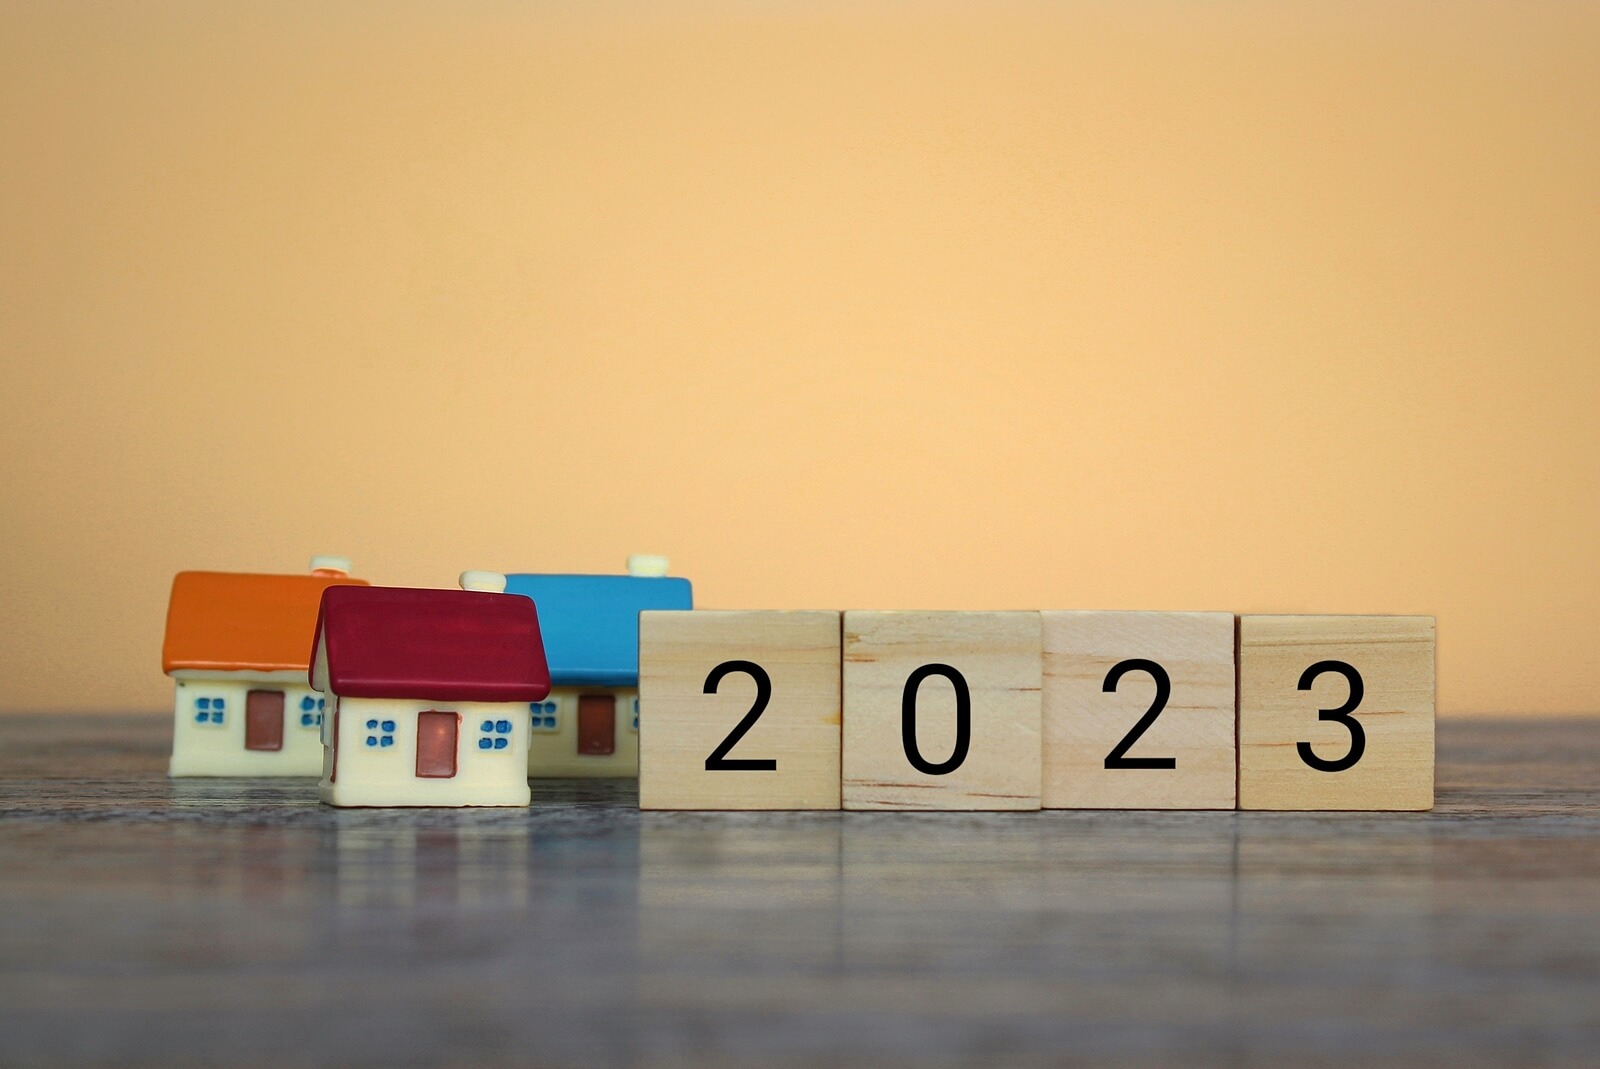 houses with 2023 in wooden blocks in front of them